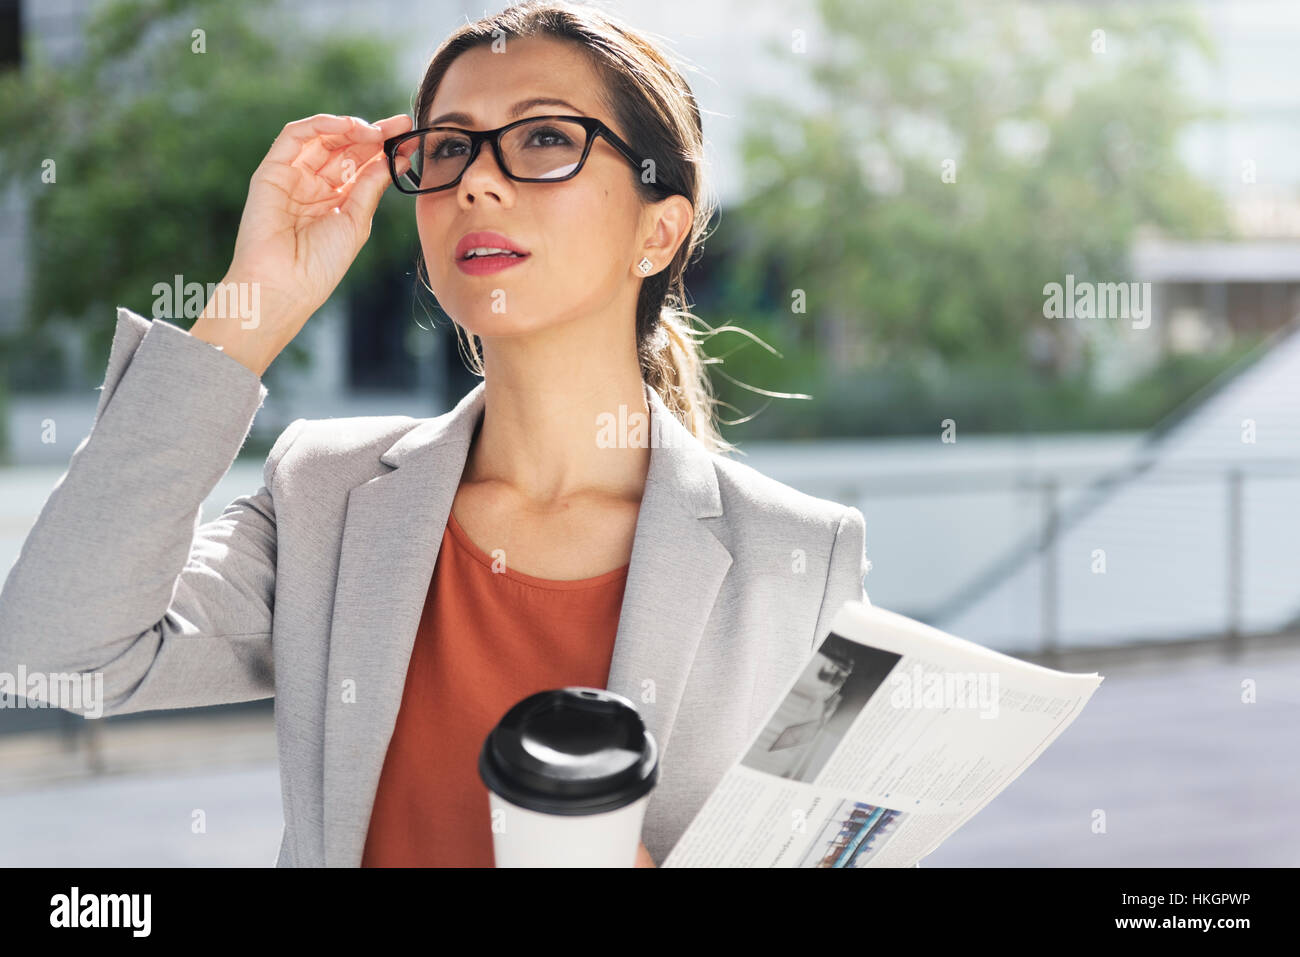 Businesswoman Vision Strategy the Way Forward Concept Stock Photo